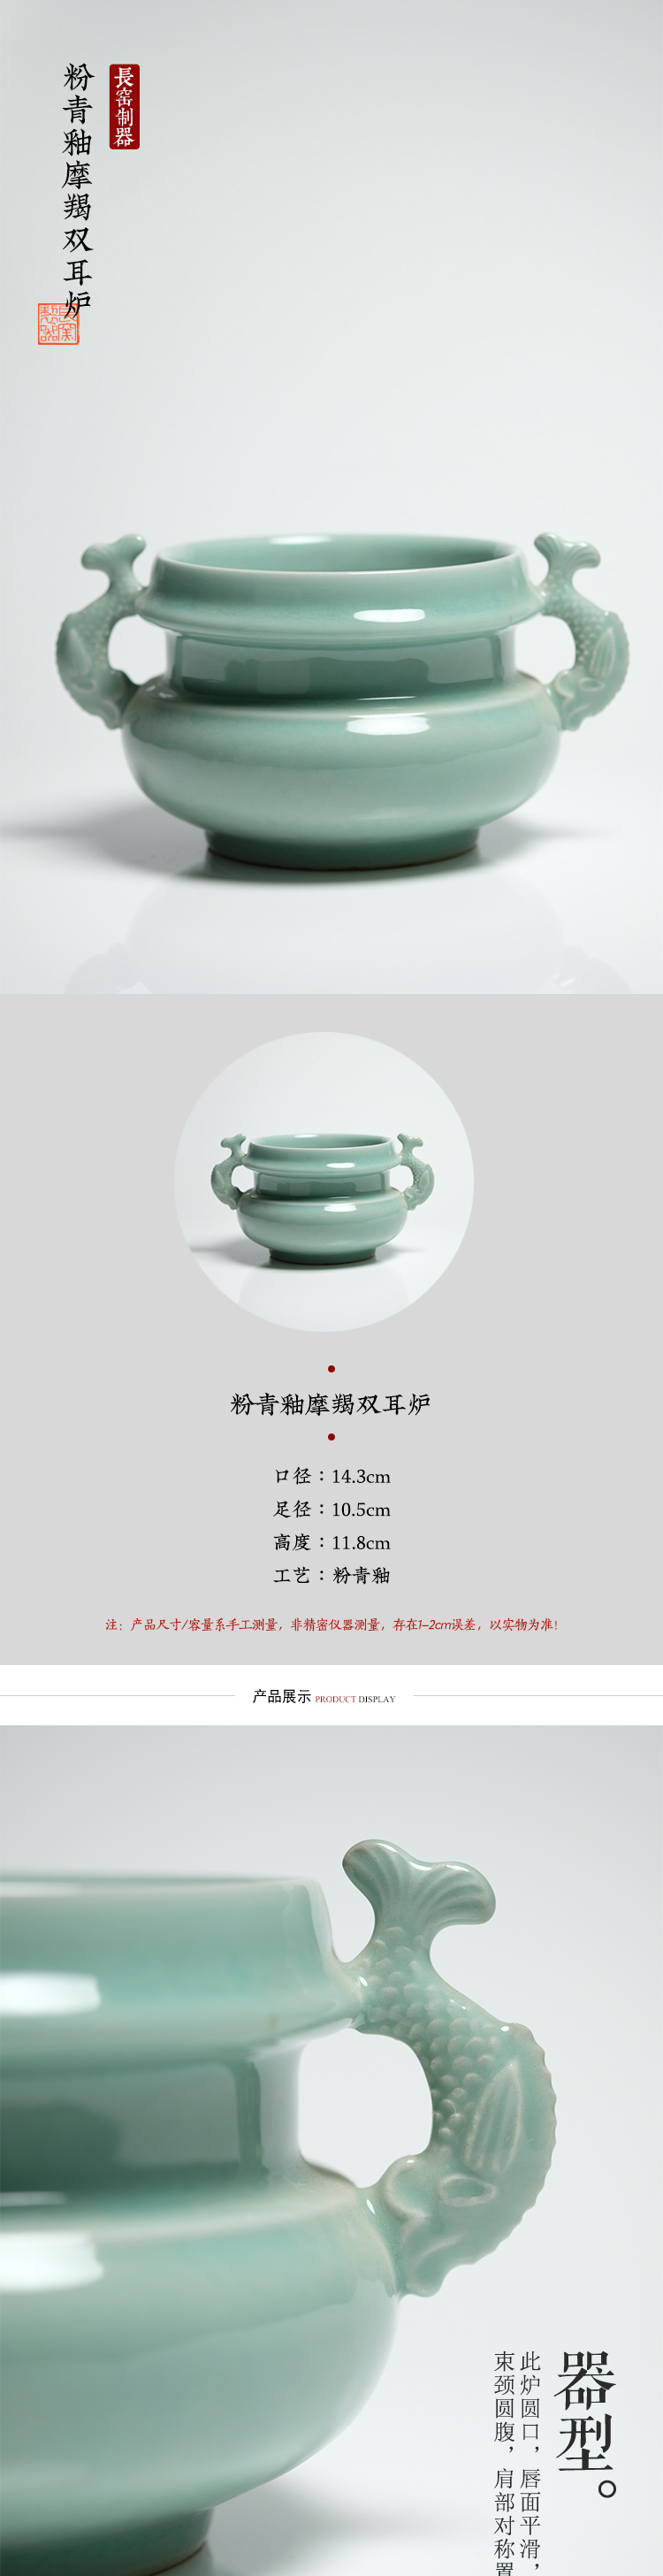 Making those offered home - cooked long up in jingdezhen ceramic powder blue glaze Capricorn ears furnace manual Chinese style household incense buner furnishing articles